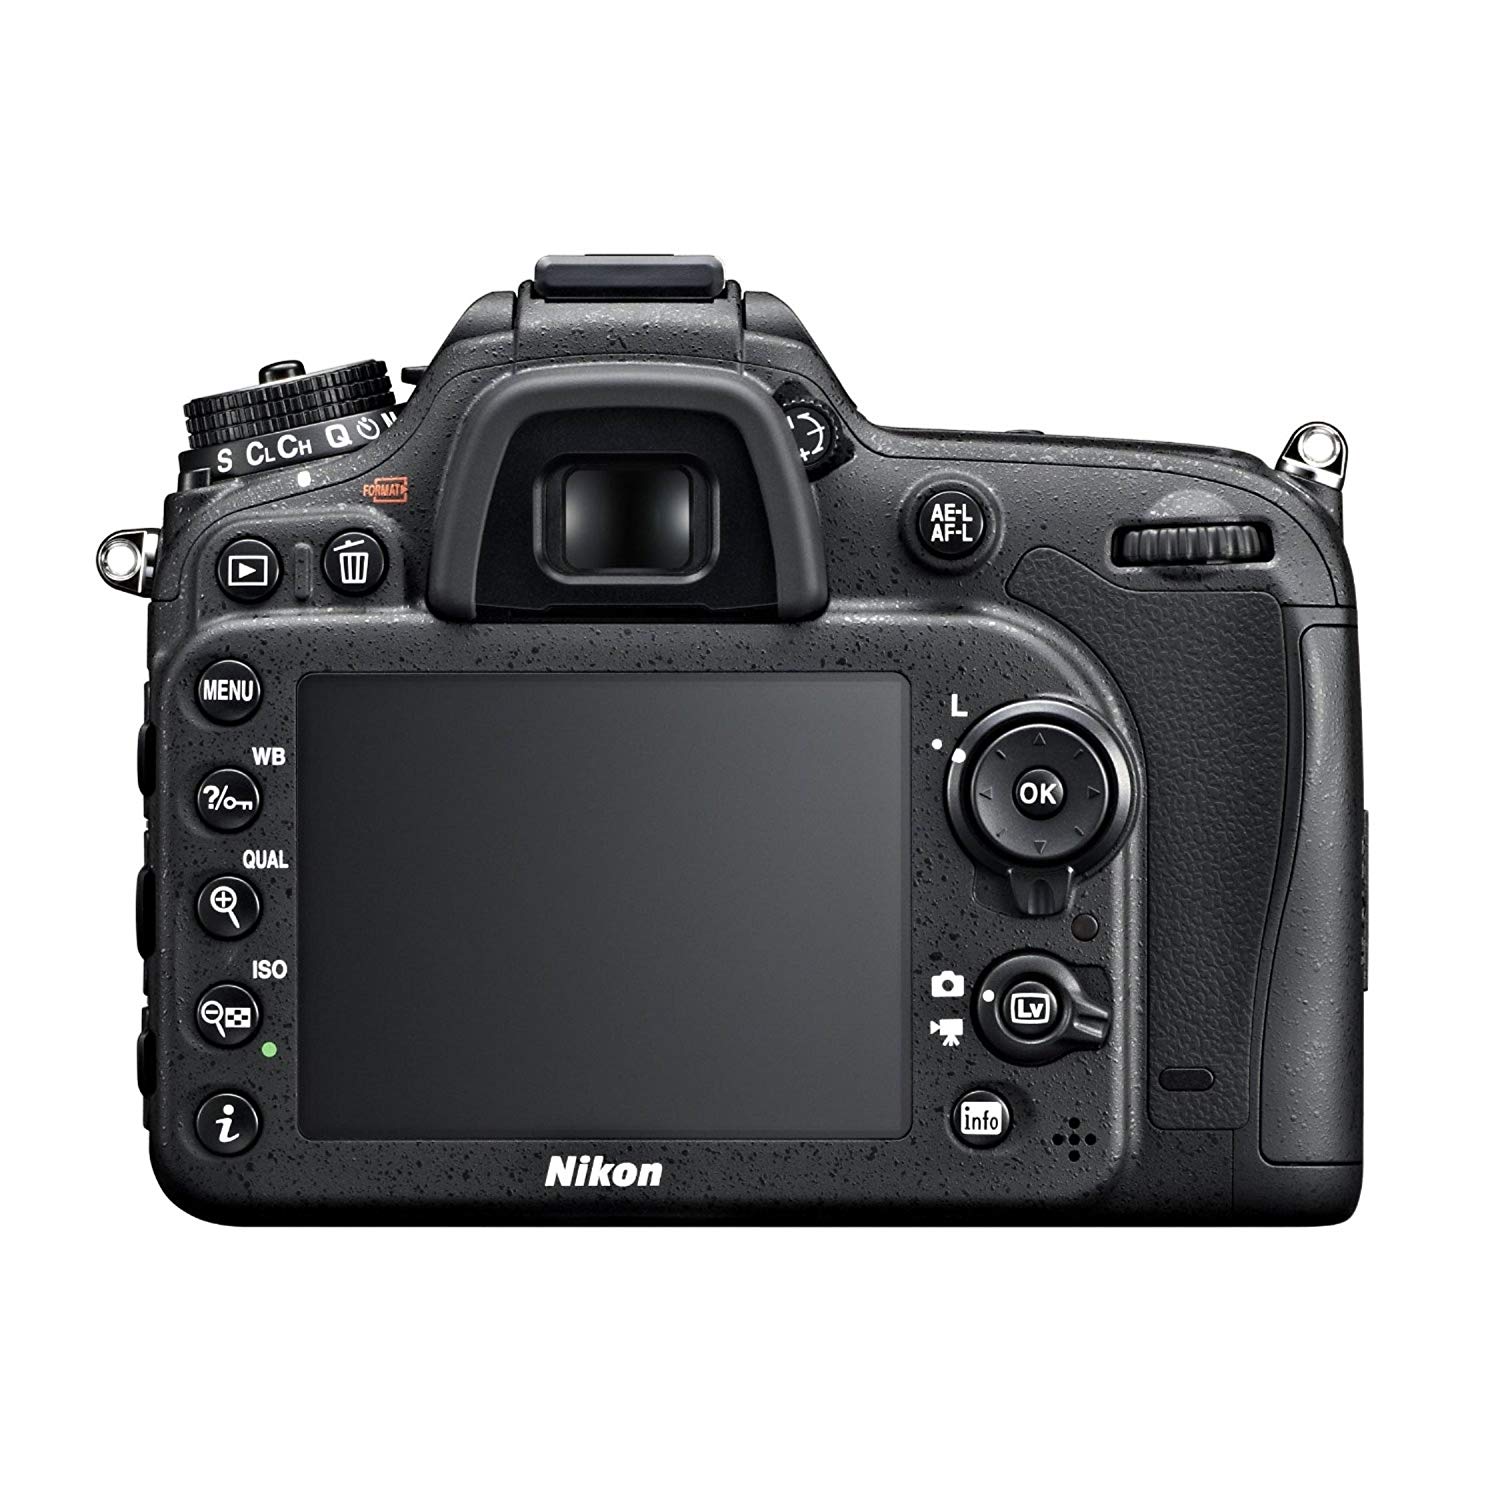 Nikon D7100 24.1MP Digital SLR Camera with AF-S: Amazon.in: Electronics